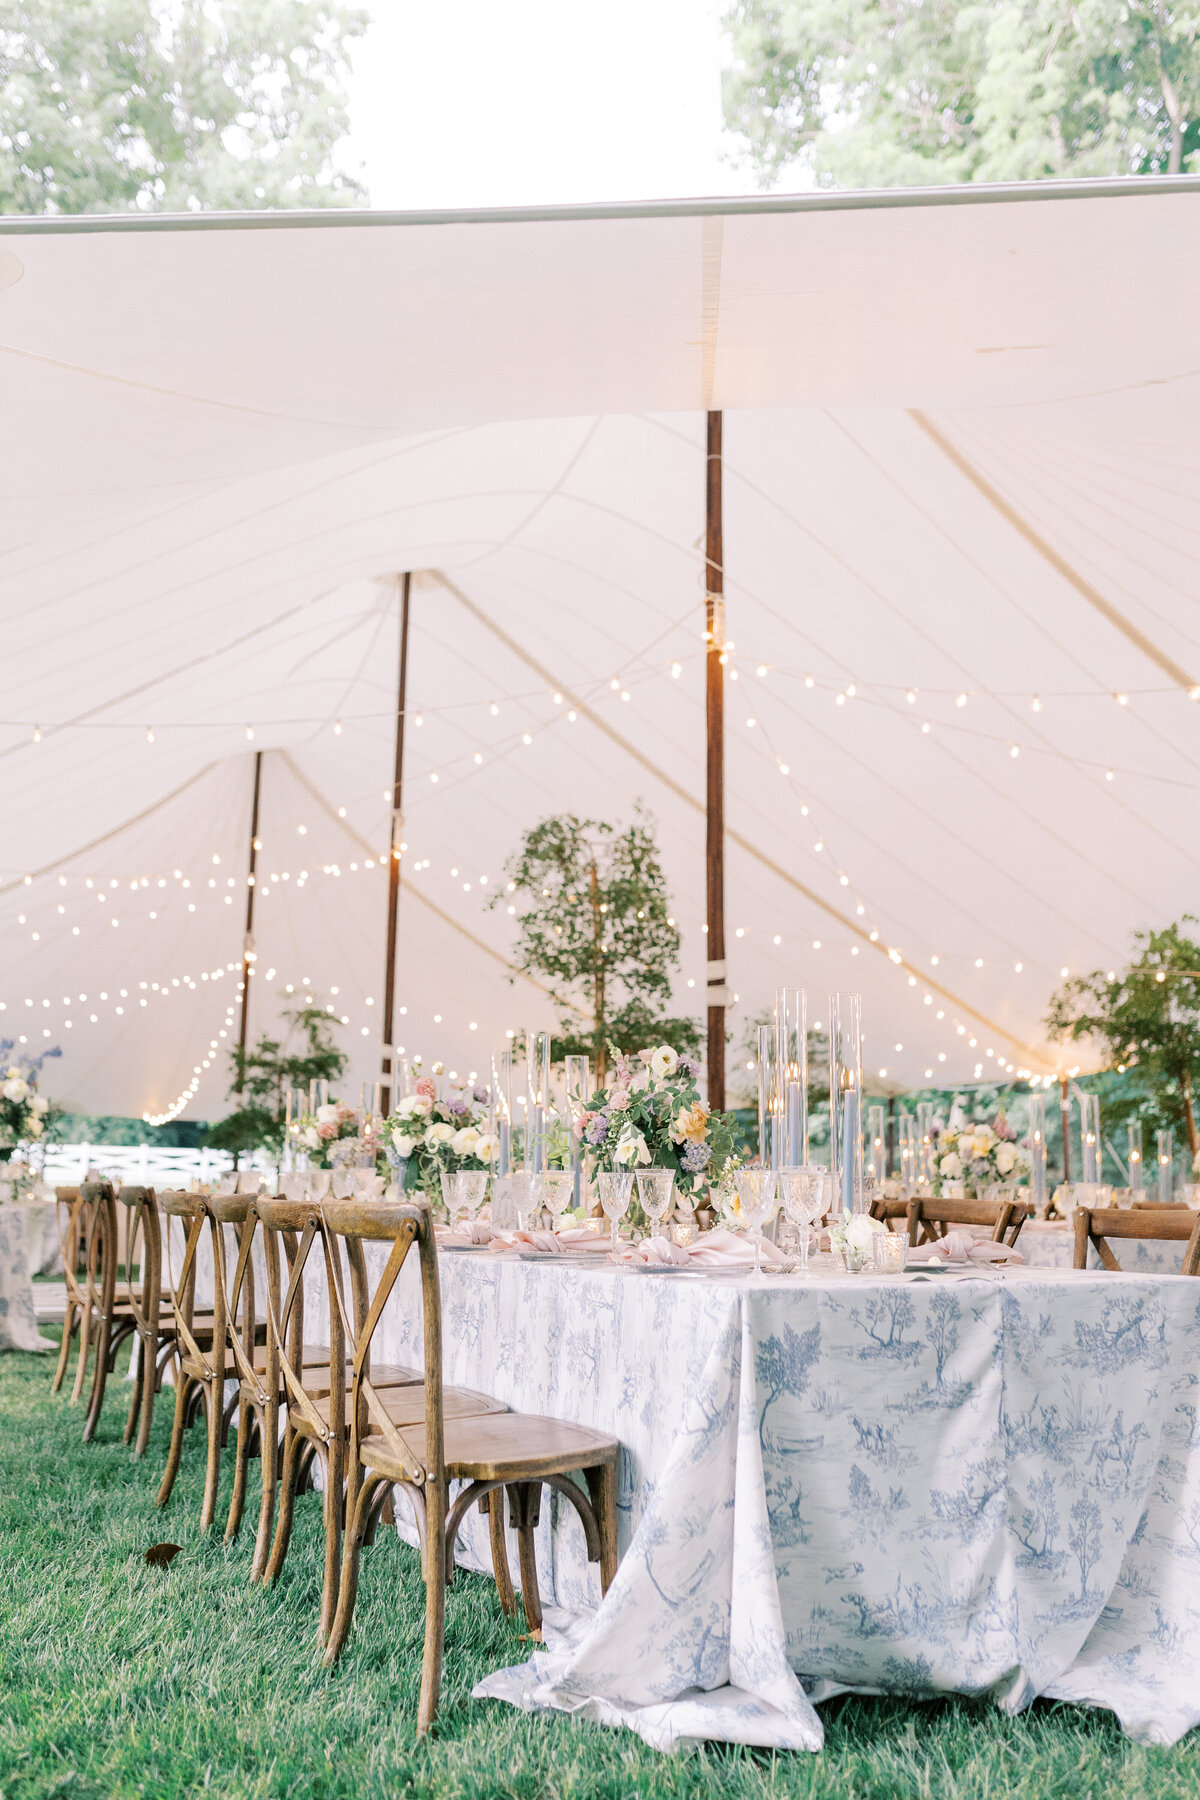 Elegant tulle themed wedding reception with family style seating